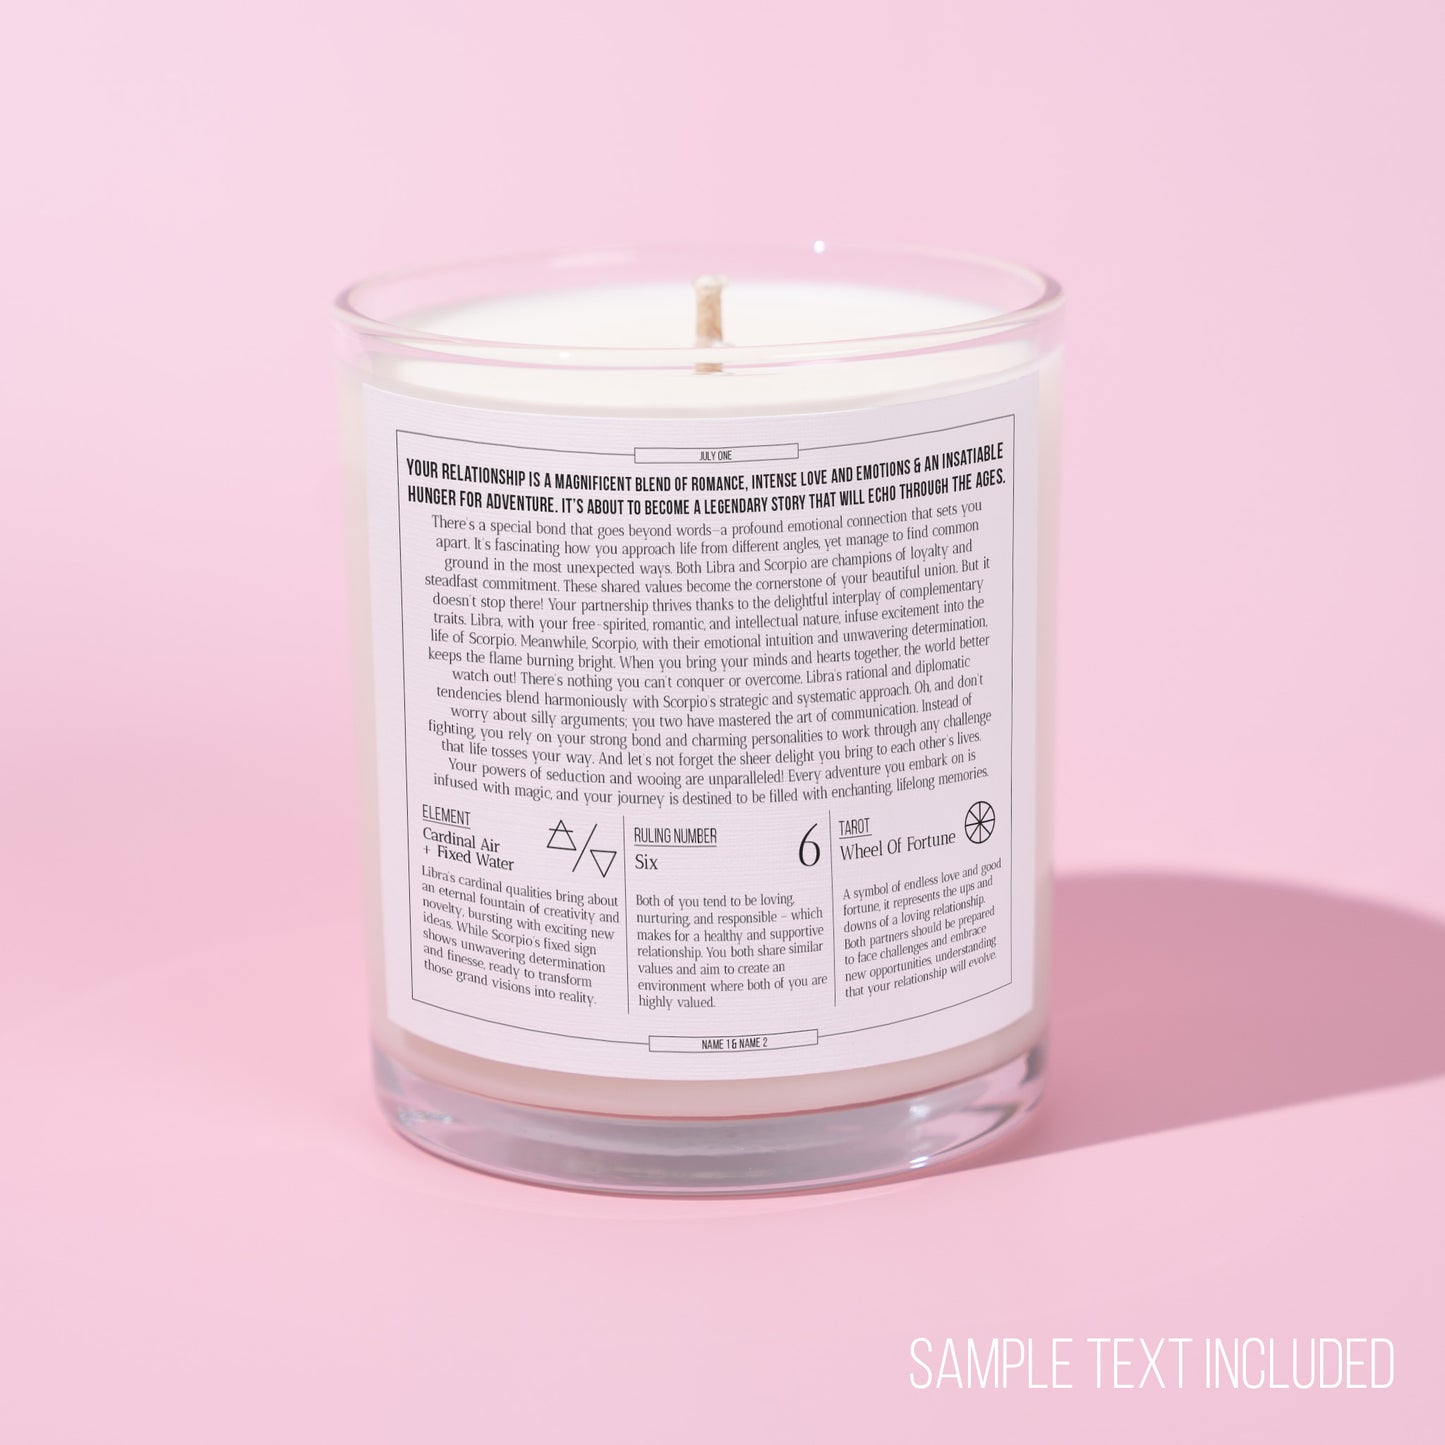 Capricorn and Pisces Compatibility Candle